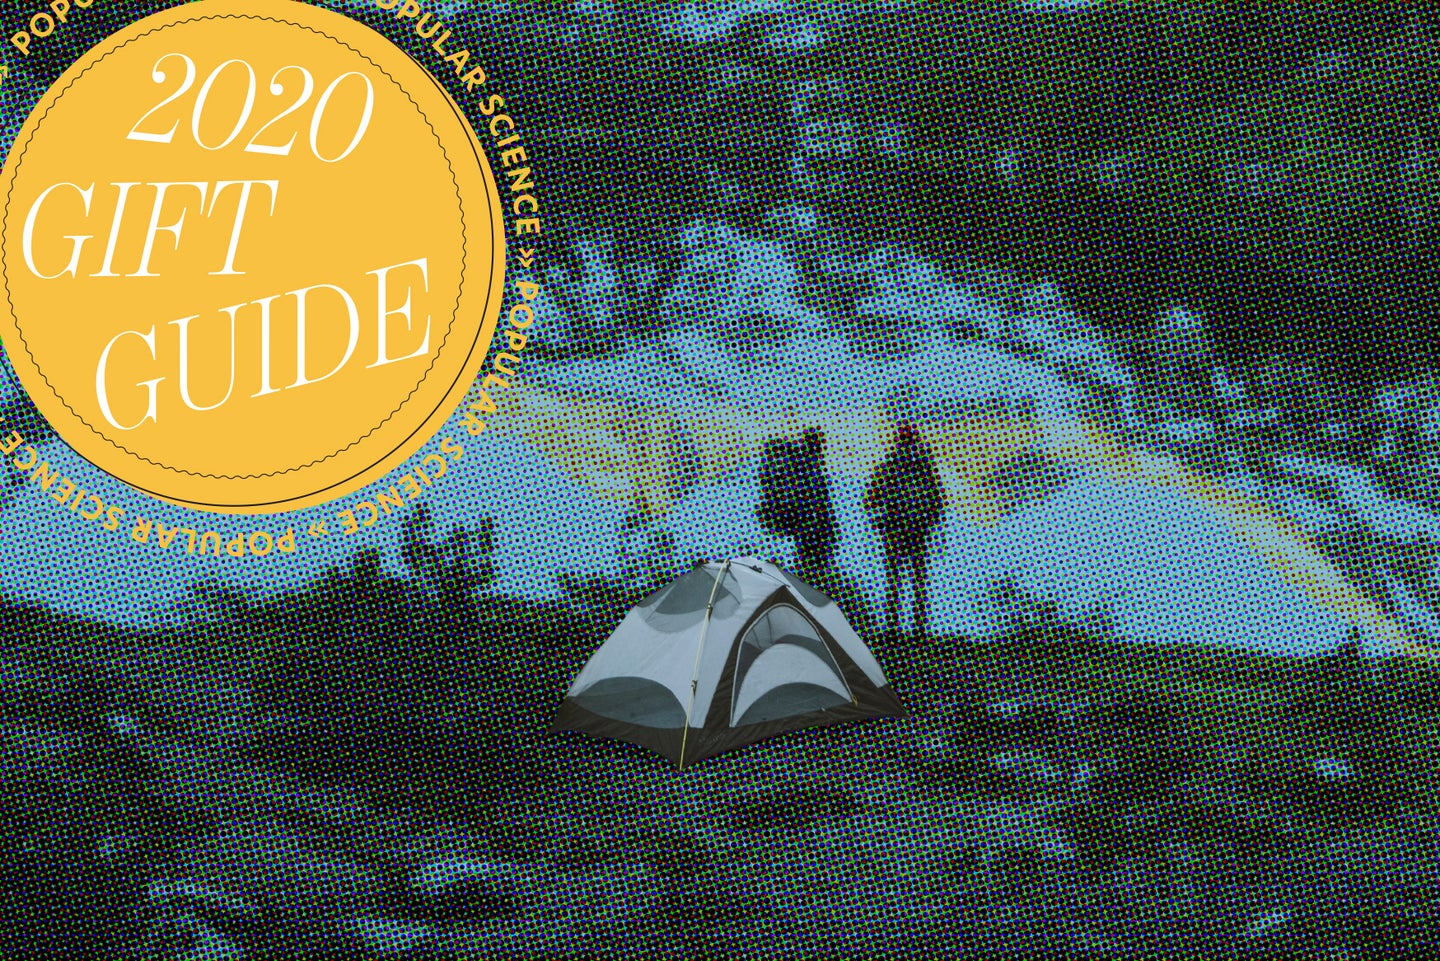 car camping gift guide